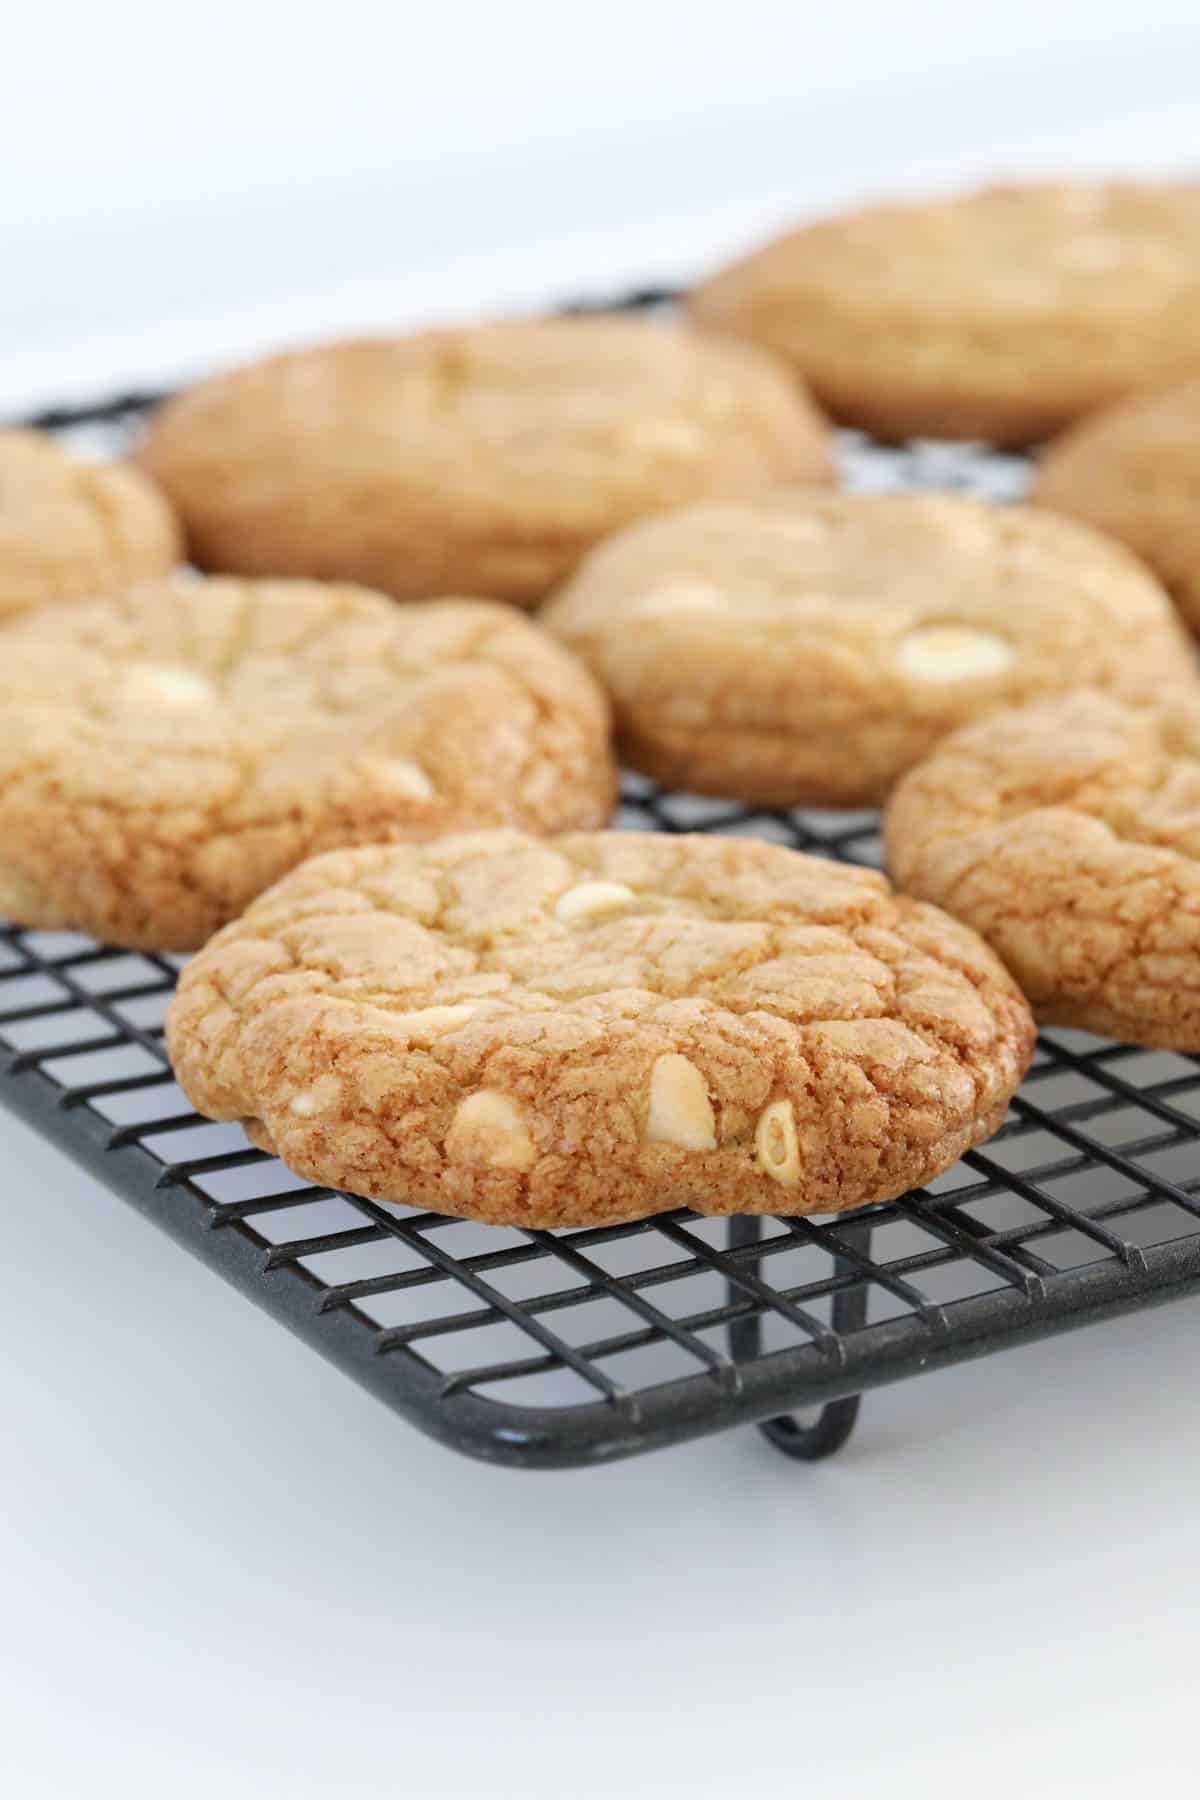 Golden baked cookies on a wire rack